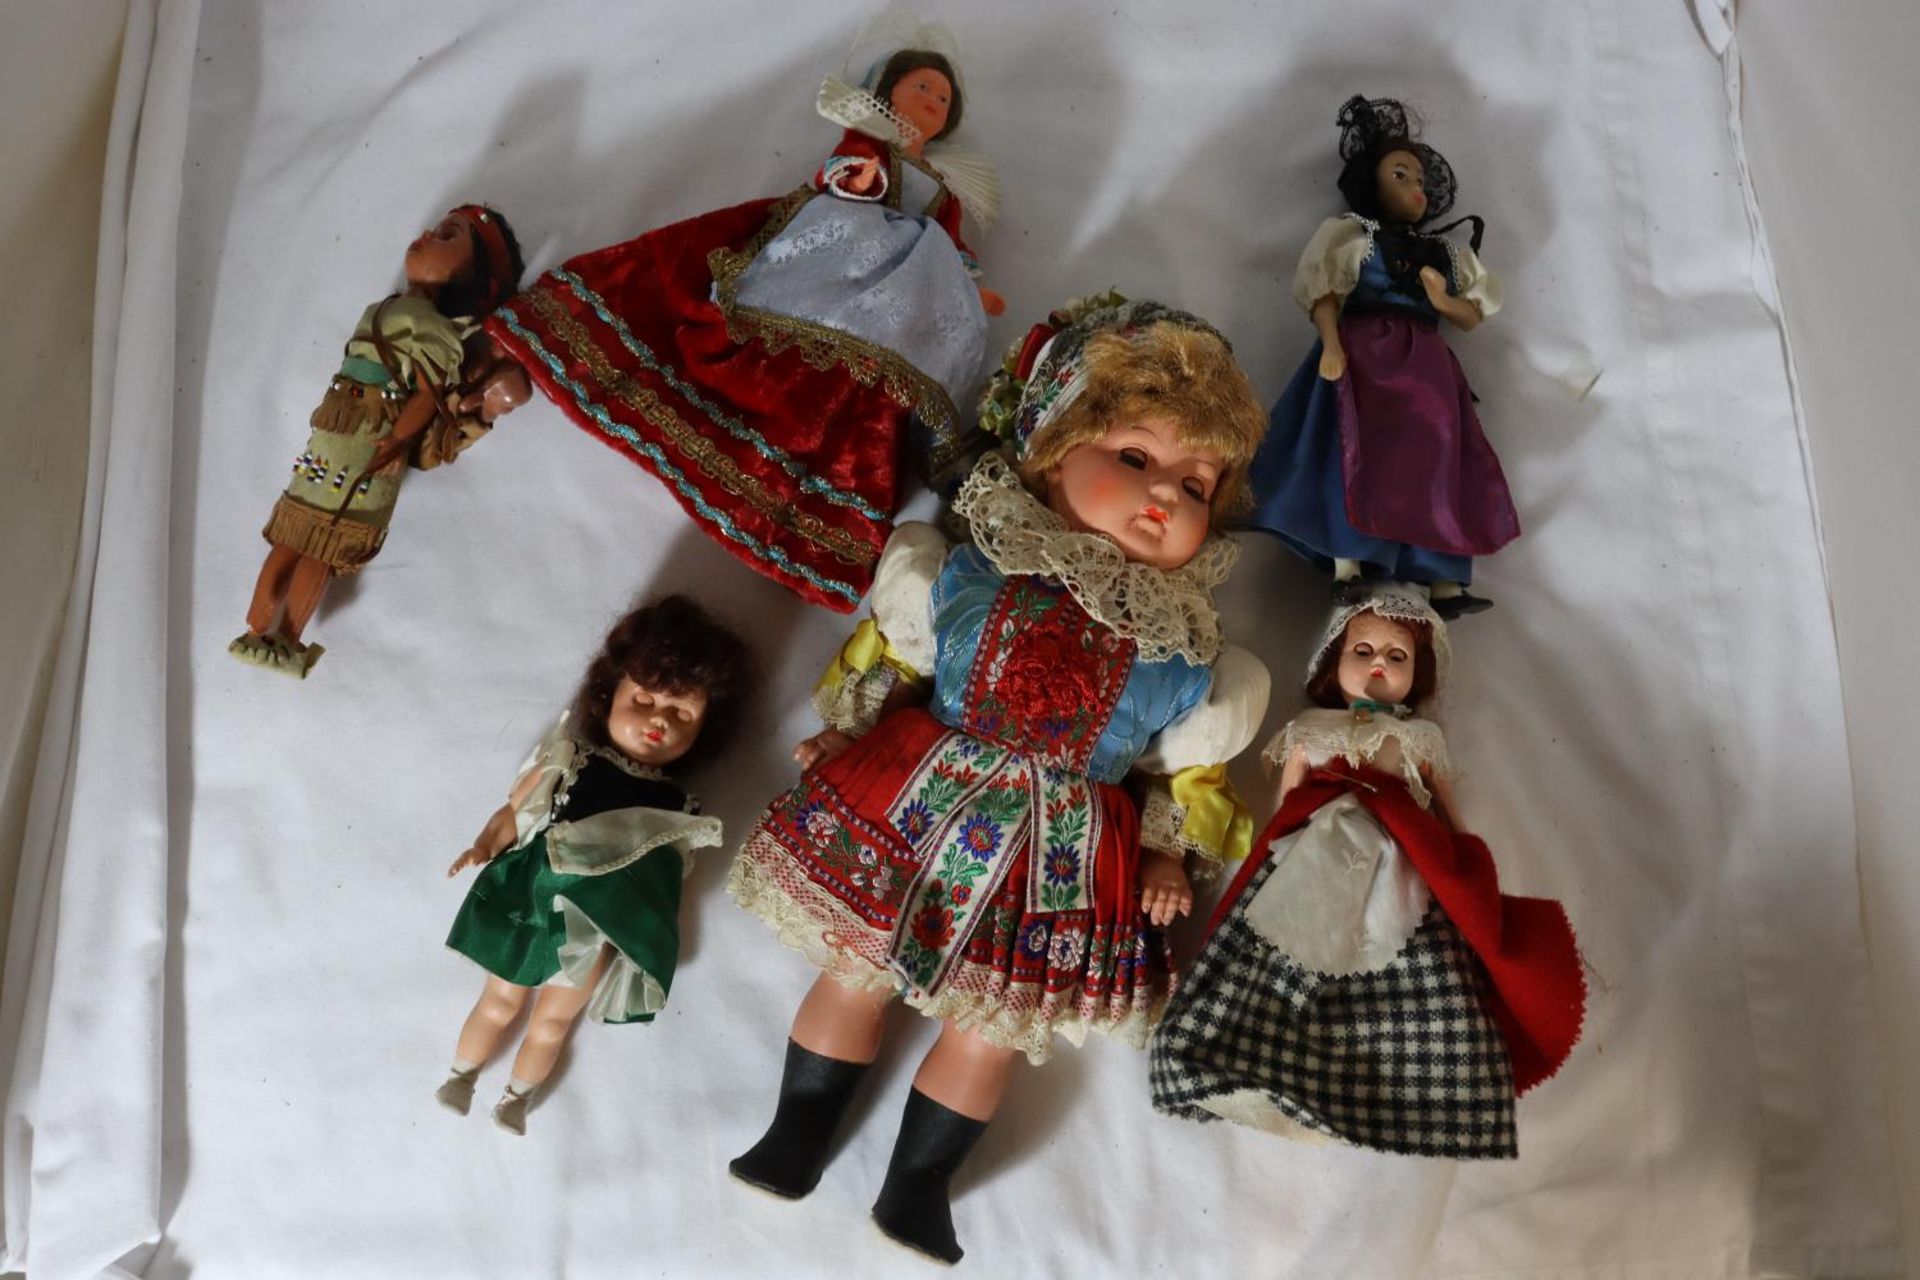 A LARGE COLLECTION OF DOLLS FROM AROUND THE WORLD - Image 2 of 4